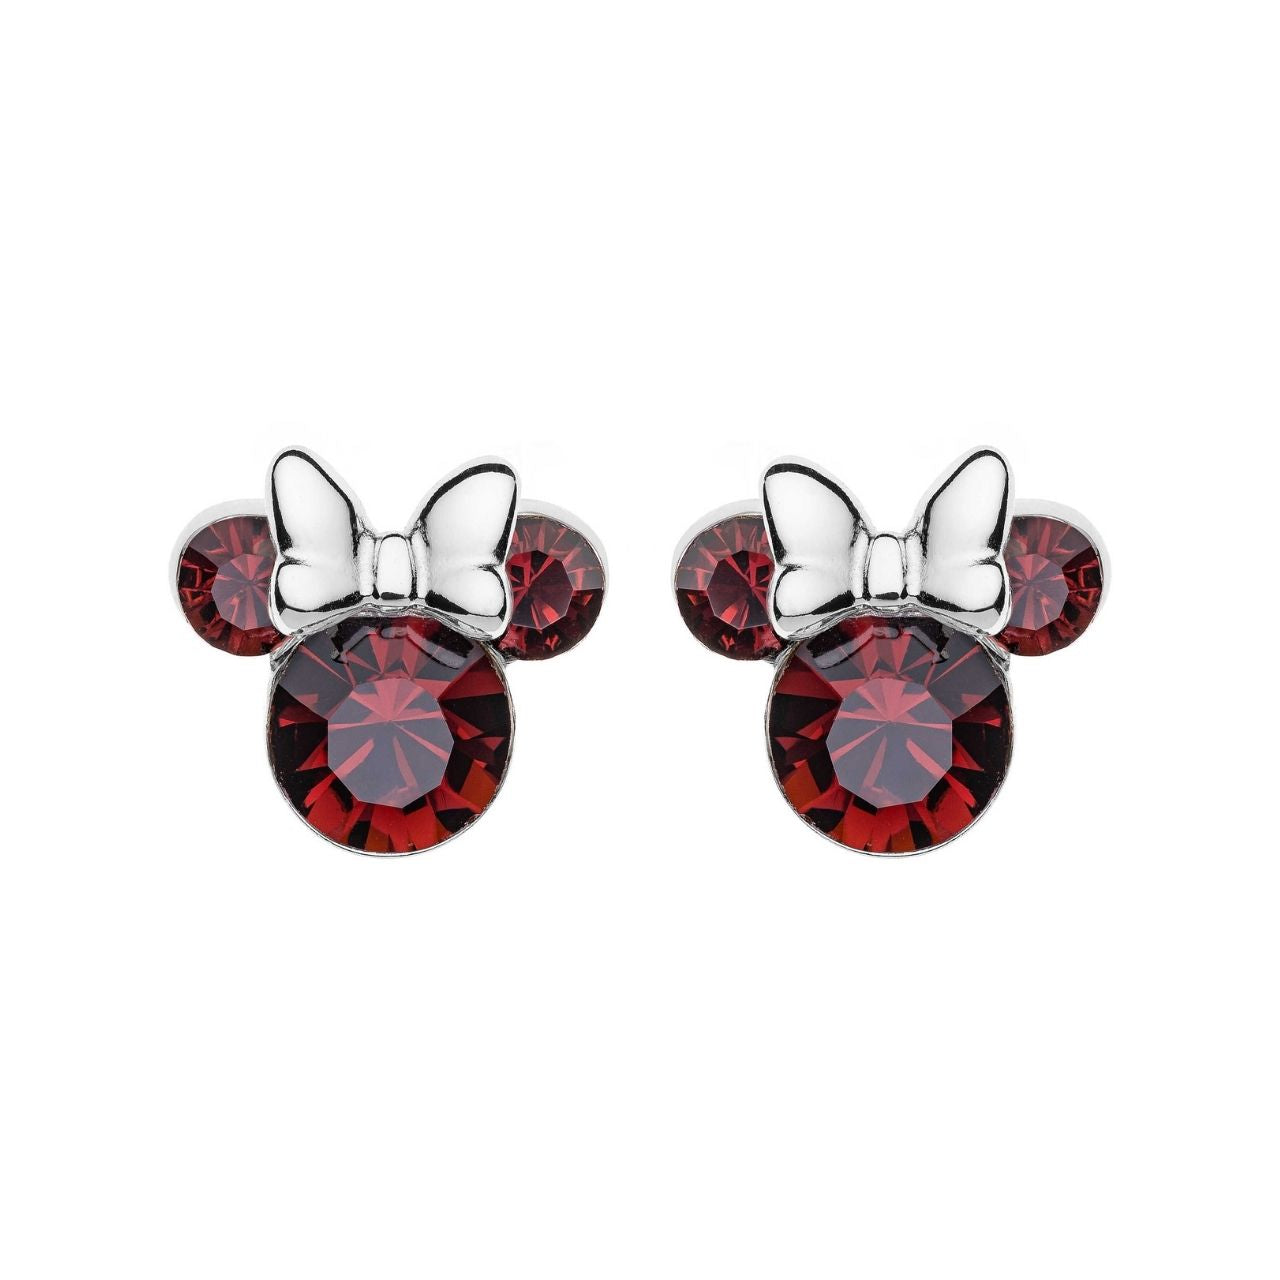 Disney Minnie Mouse Sterling Silver Birthstone Earrings Red  Red January Birthstone  Stunning silver Birthstone Earring form a silhouette of Minnie Mouse's with red CZ Crystals adding a feminine touch to the Disney classic piece of Jewellery.  Trendy and fashionable two tone design, the Disney Minnie Mouse Silhouette Sterling Silver earrings add a chic, fun touch to any outfit.